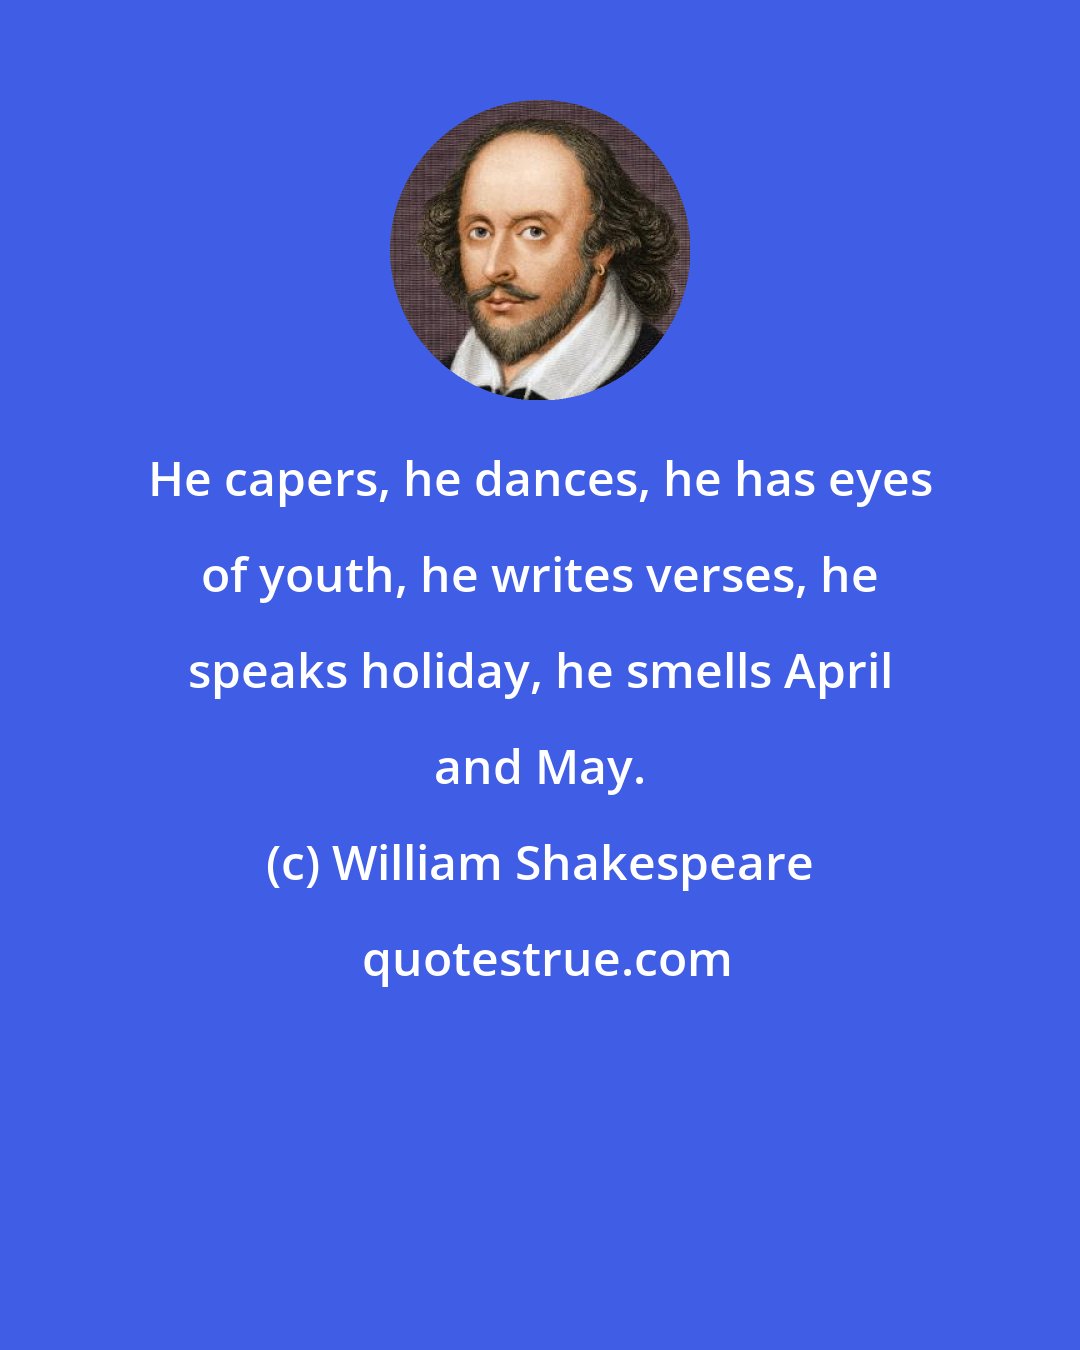 William Shakespeare: He capers, he dances, he has eyes of youth, he writes verses, he speaks holiday, he smells April and May.